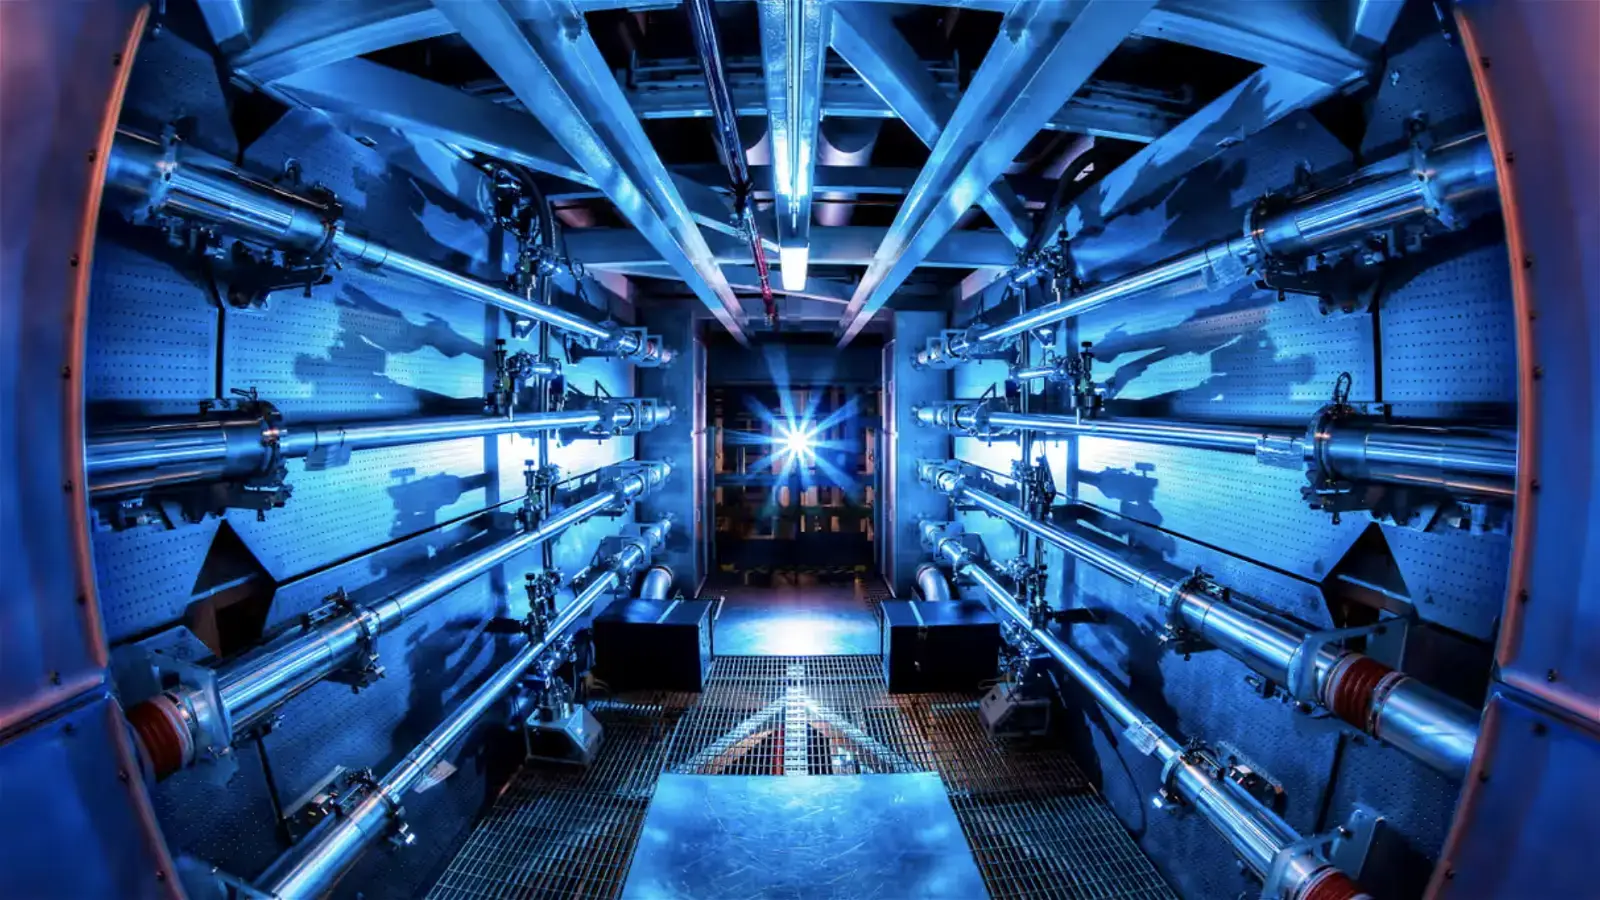 US scientists achieve net energy gain for second time in nuclear fusion reaction